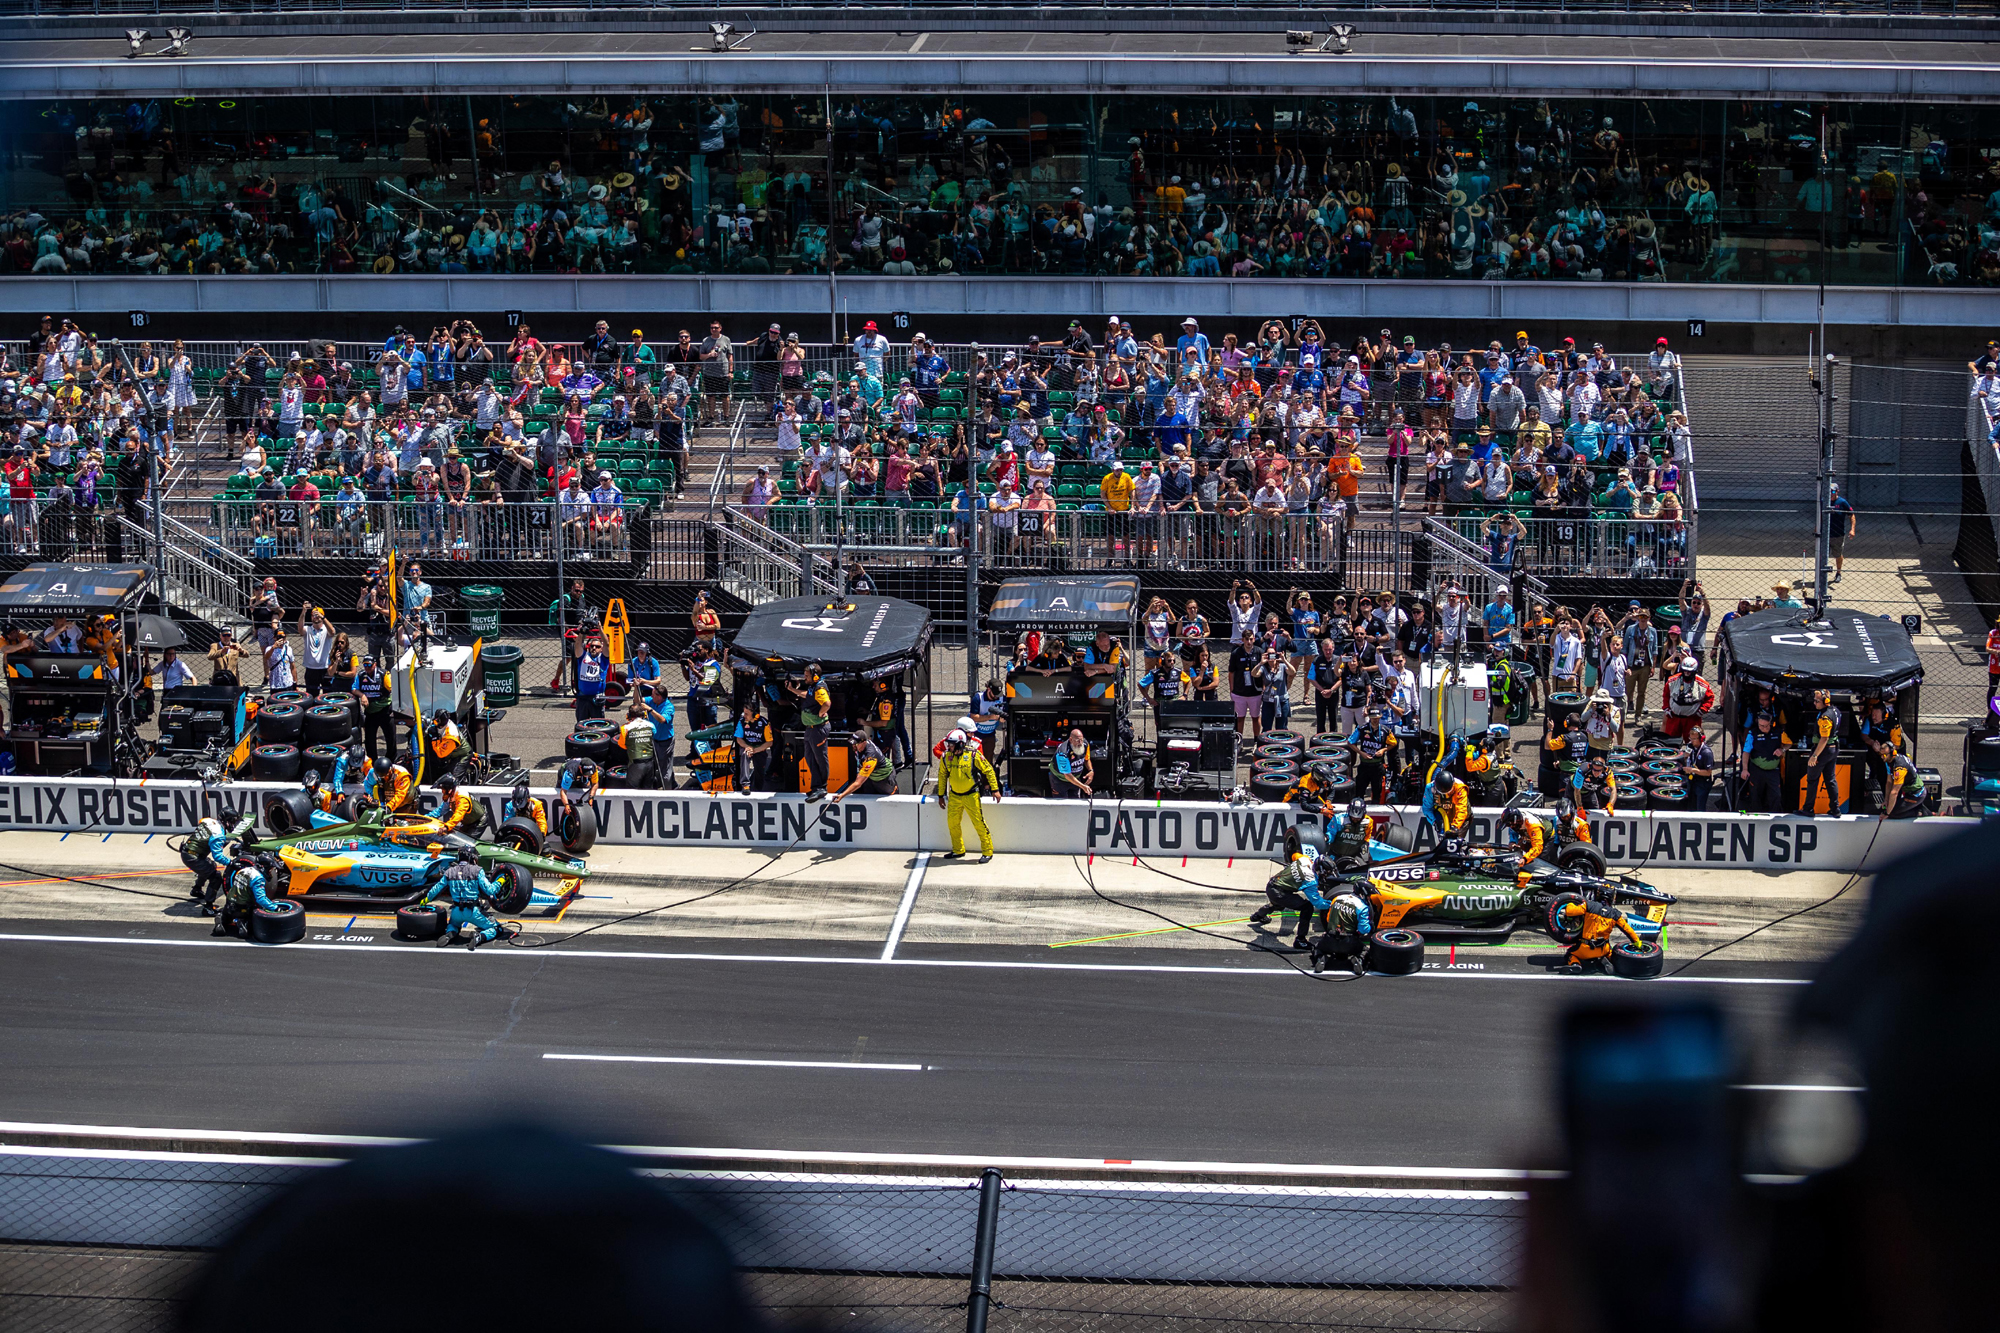 106th Running Of The Indianapolis 500 Presented By Gainbridge Sunday May 29 2022 Largeimagewithoutwatermark M60359b